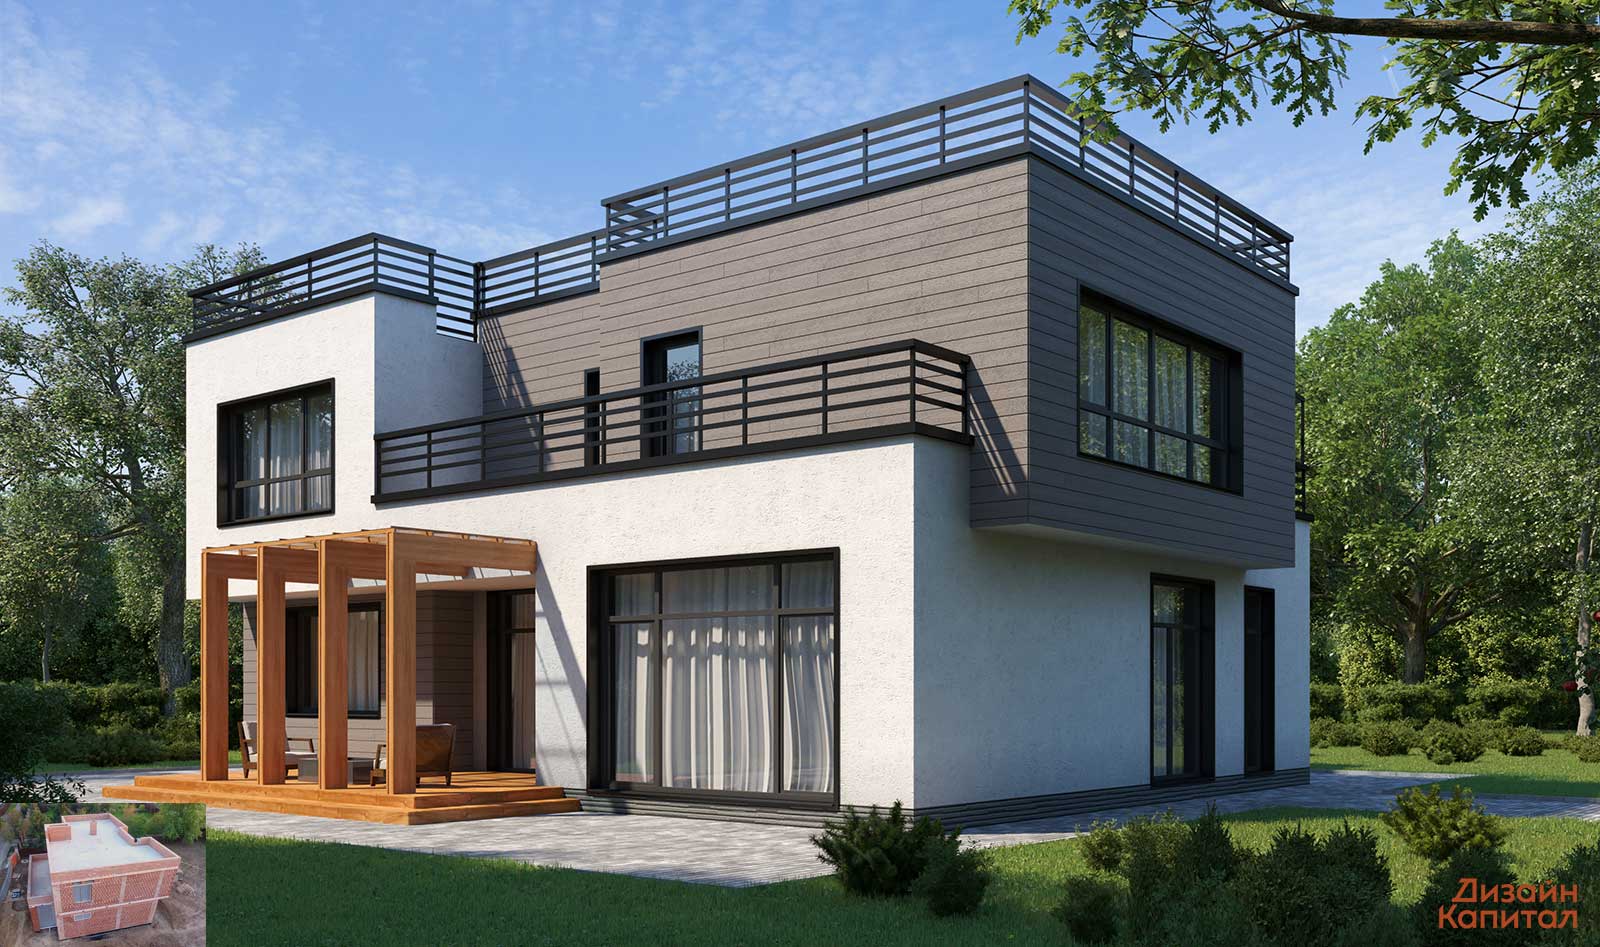 Modern house facade. White stucco on the first floor and gray fiber cement boards on the second floor